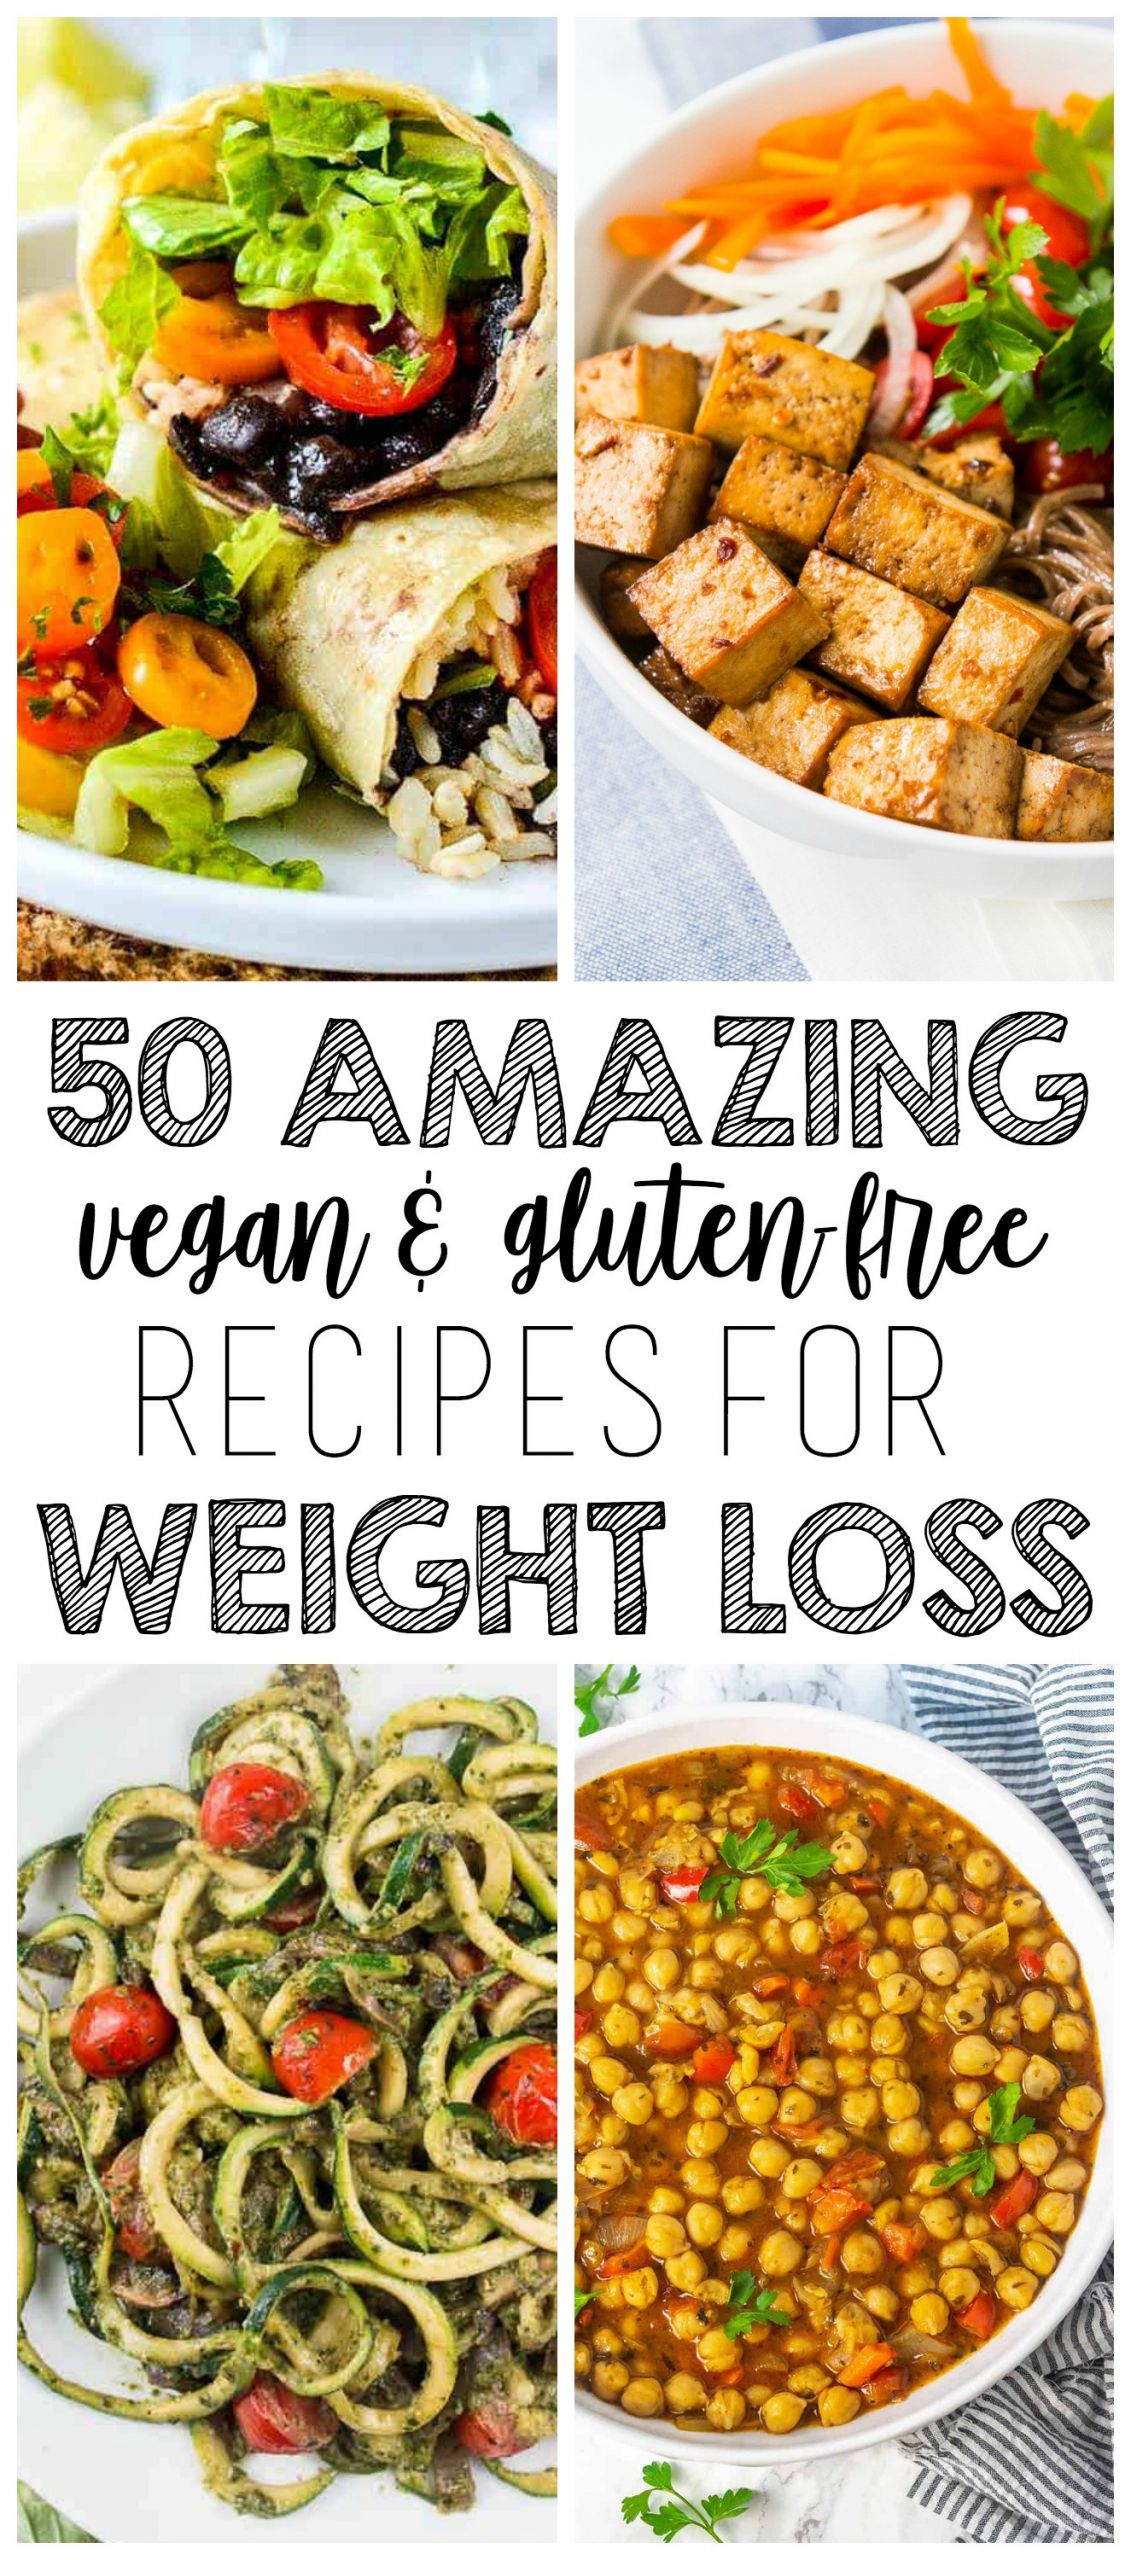 Weight Loss Meal Recipes
 50 AMAZING Vegan Meals for Weight Loss Gluten Free & Low